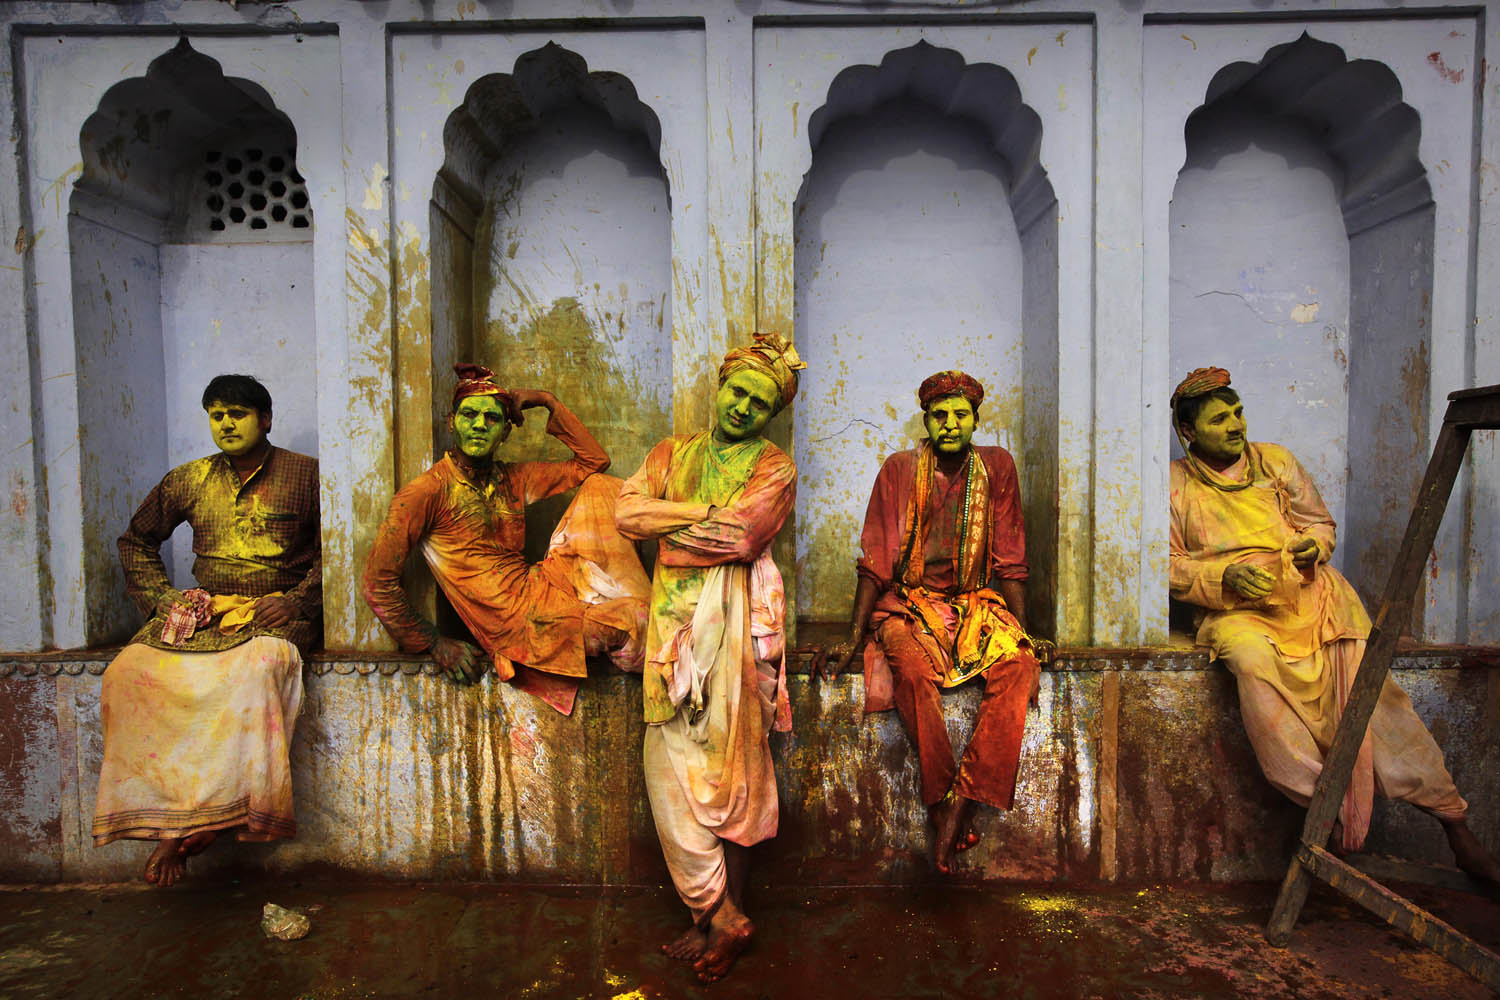 March 22, 2013. Indian villagers from Nandgaon wait for the arrival of villagers from Barsana to play Lathmar Holi at the Nandagram temple in Nandgaon, India.